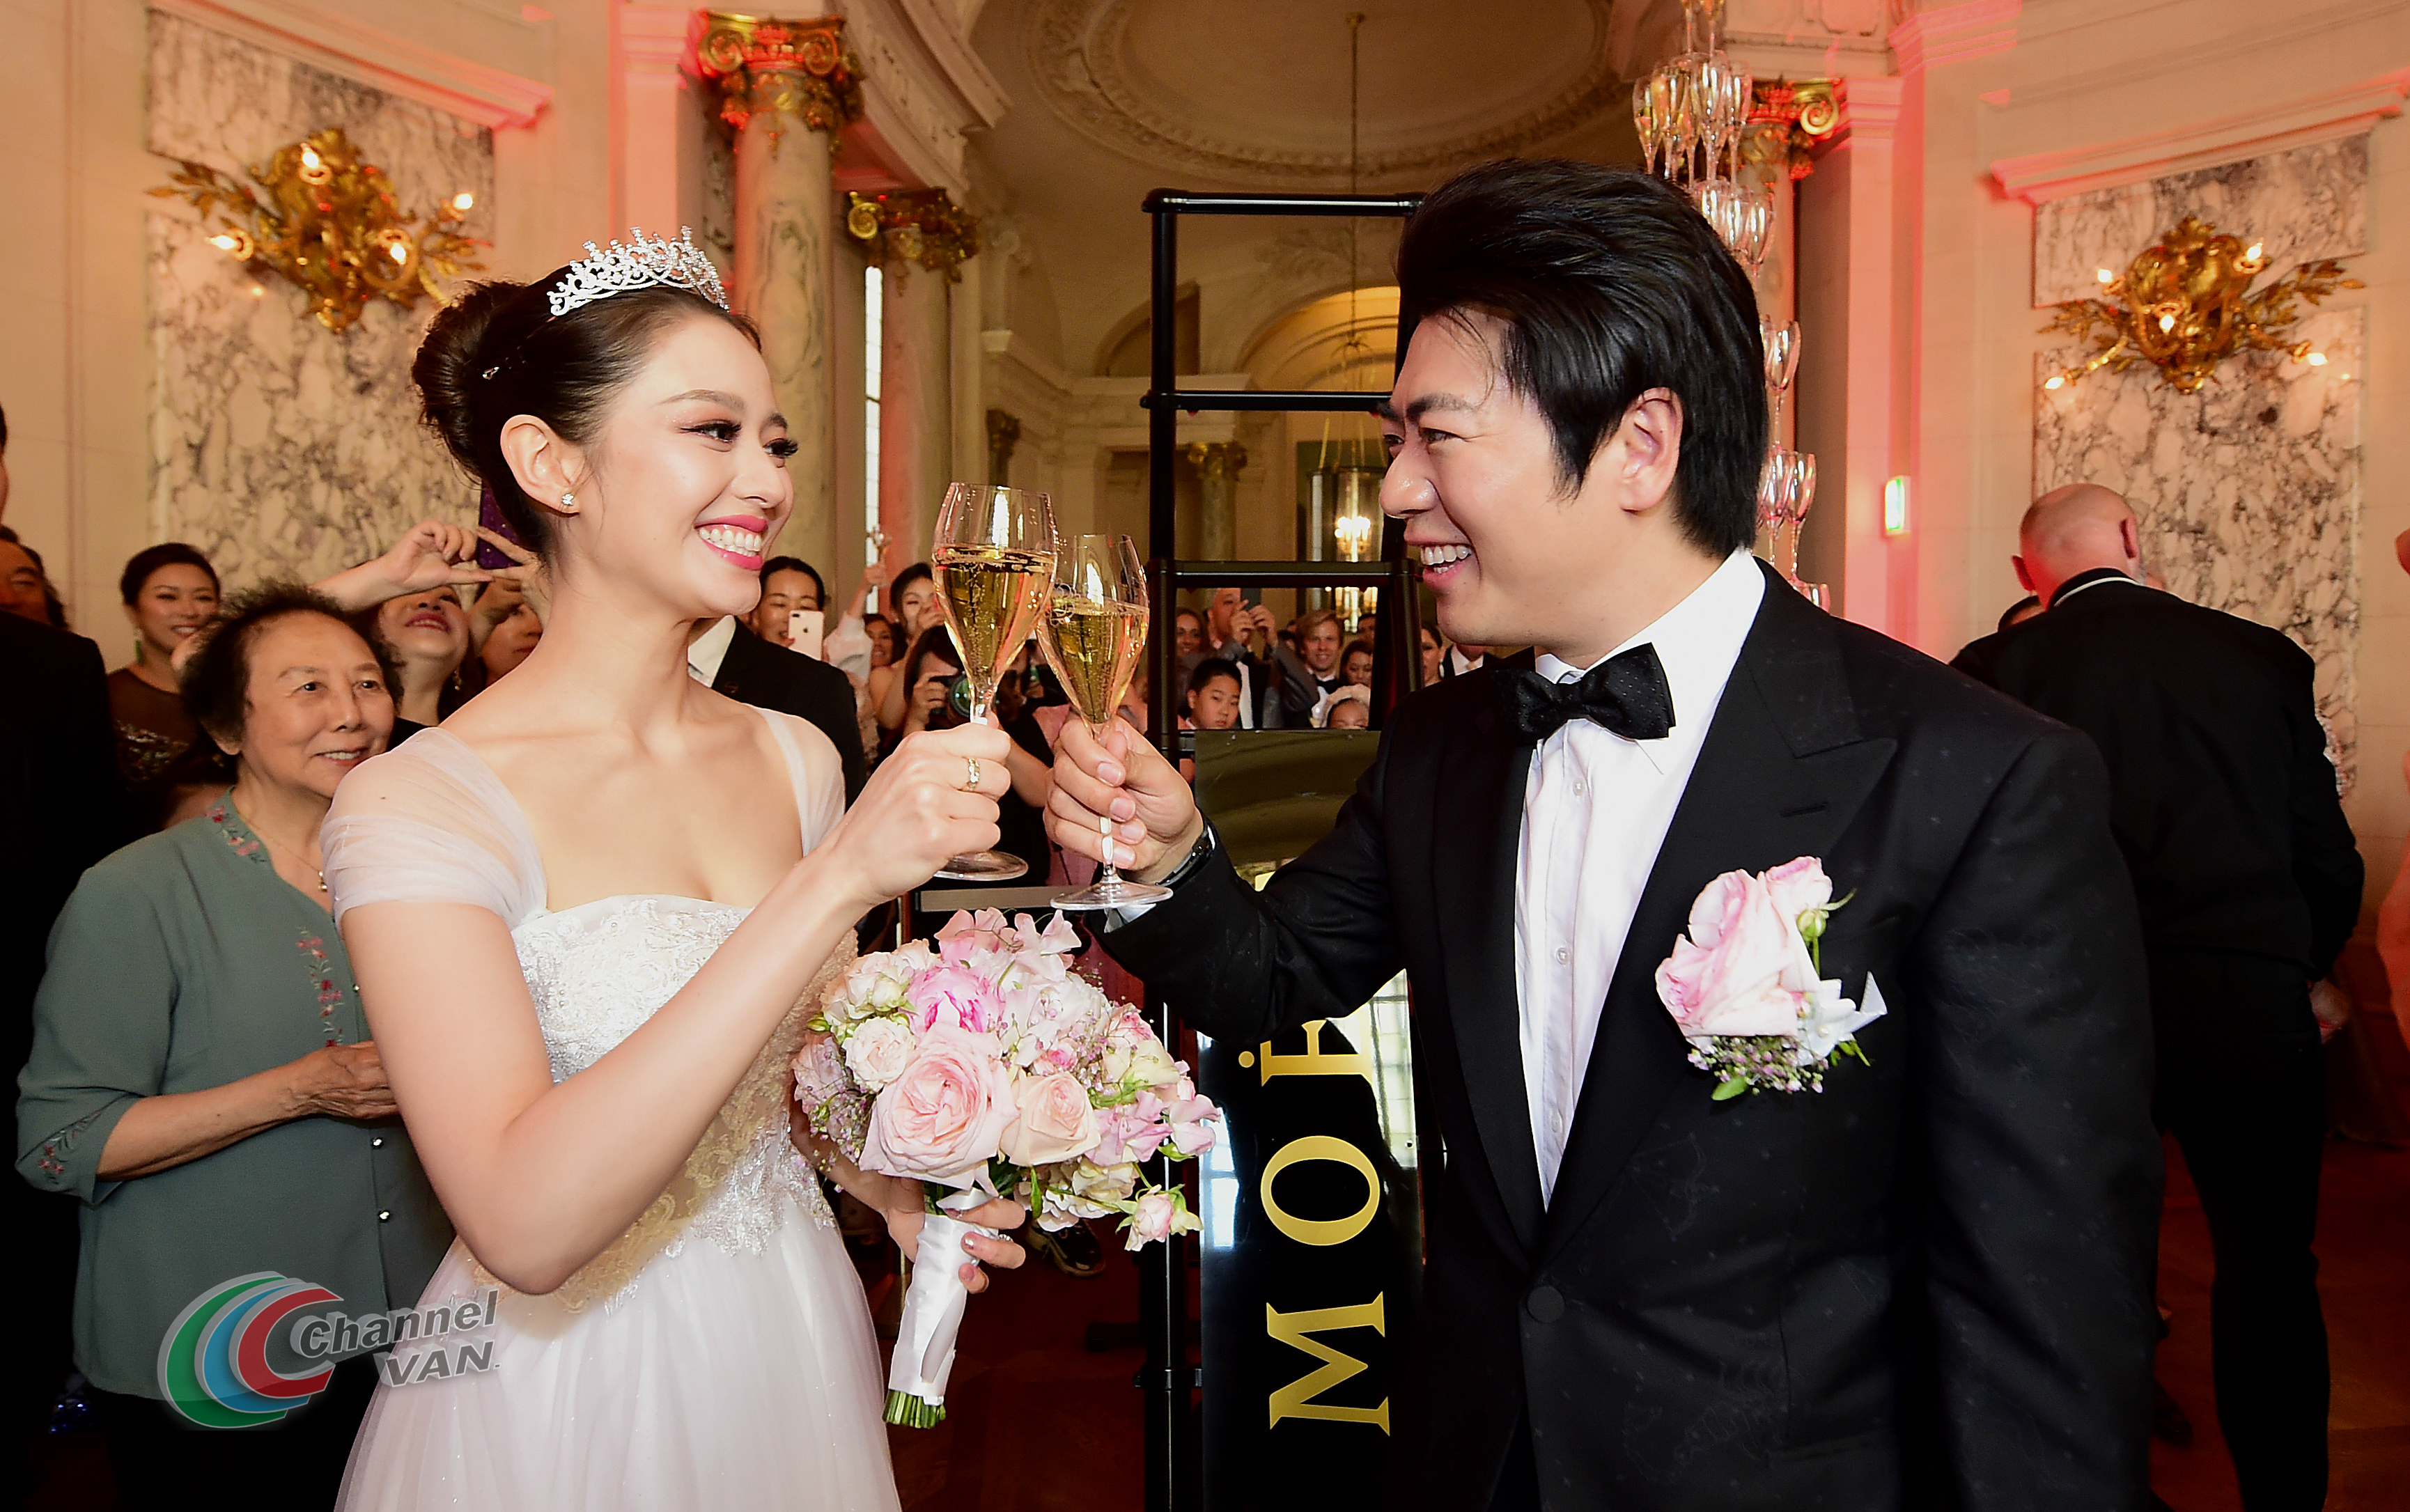 PARIS, FRANCE - JUNE 02: Pianists Lang Lang & Gina Alice drink a glass of Moet et Chandon Champagne during their Cocktail Wedding at Hotel Shangri-La on June 02, 2019 in Paris, France. (Photo by Anthony Ghnassia/Getty Images for Moet Henessy)